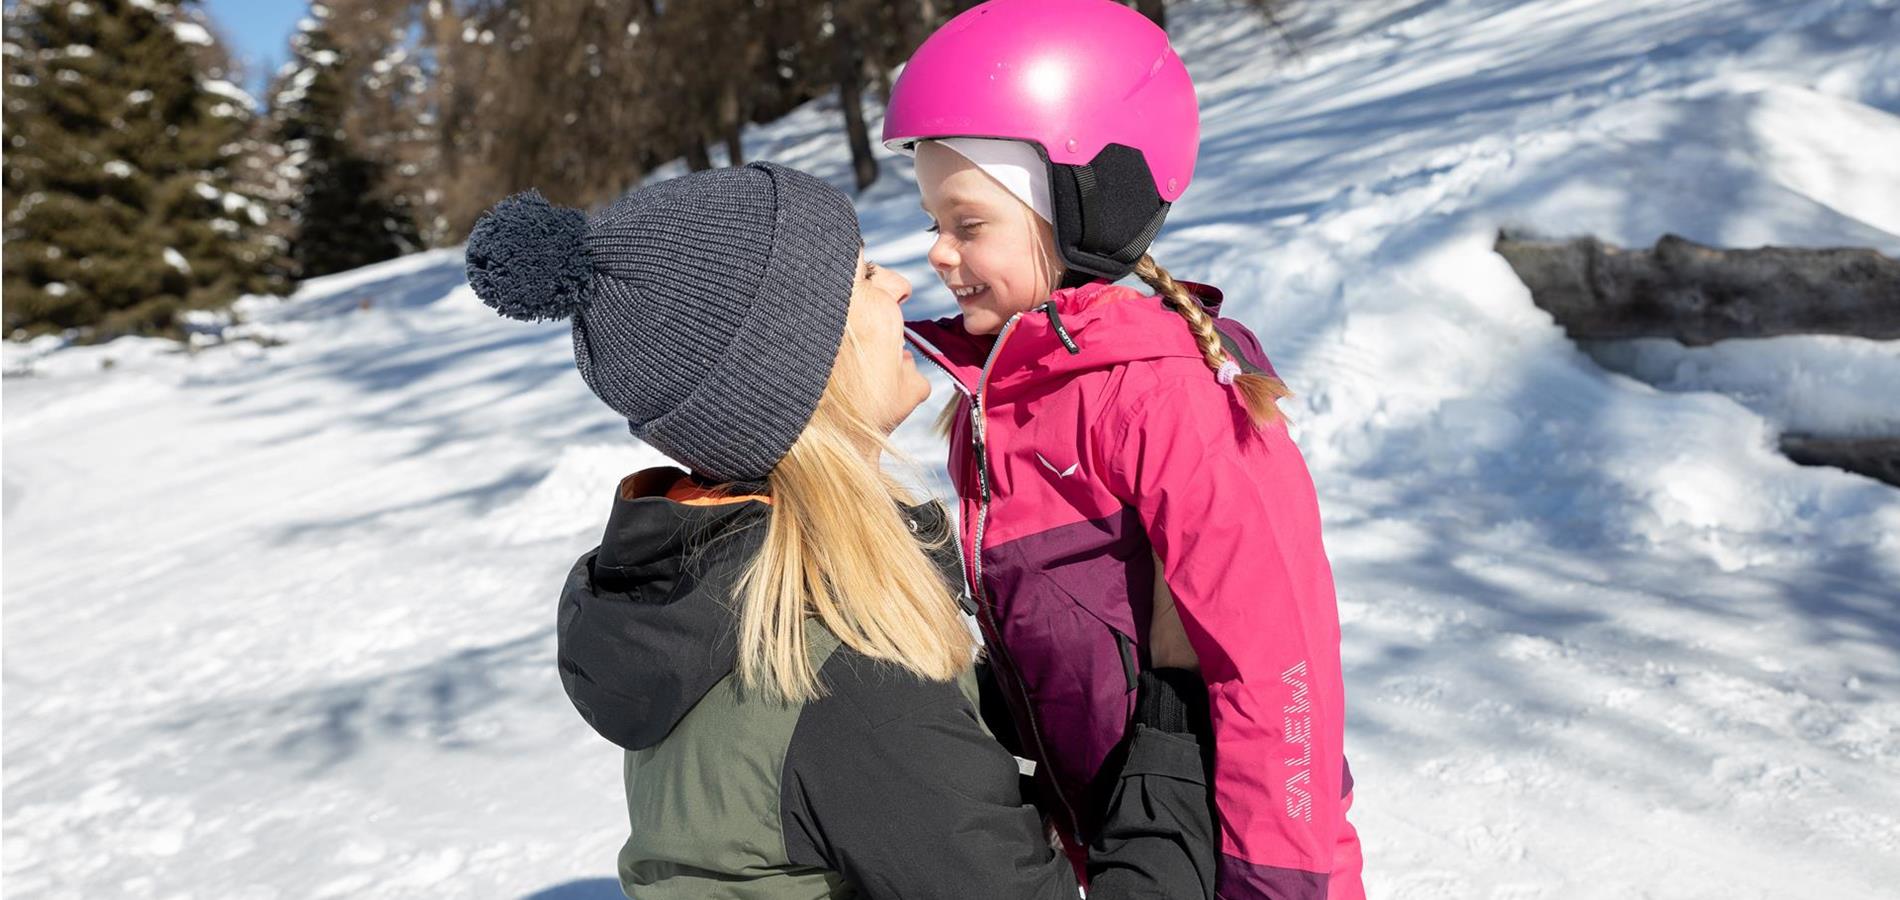 Mother and daughter in winter in Verano, South Tyrol. Both are laughing and looking at each other. The girl is around 4 years old and is wearing a pink ski suit with a pink helmet.